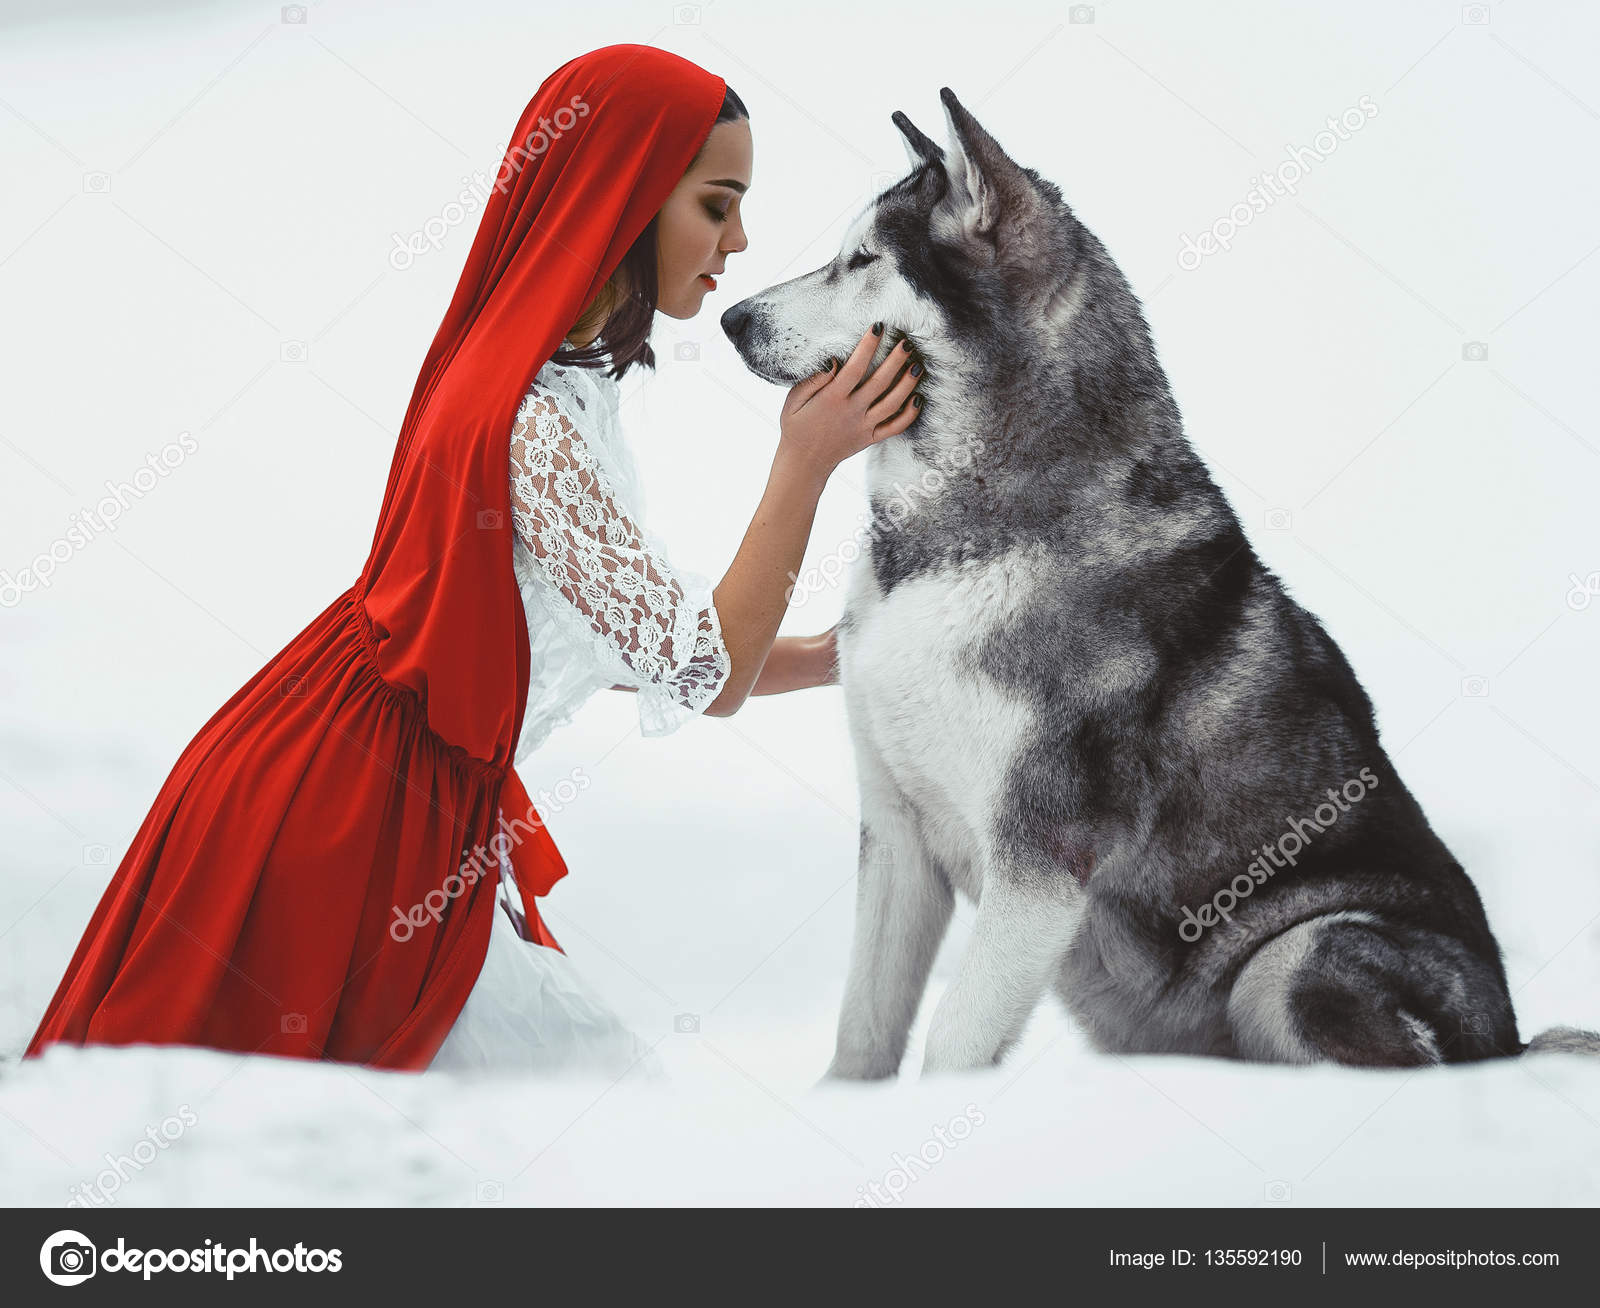 Girl costume Red Riding Hood with dog malamute like a Stock Photo by 135592190